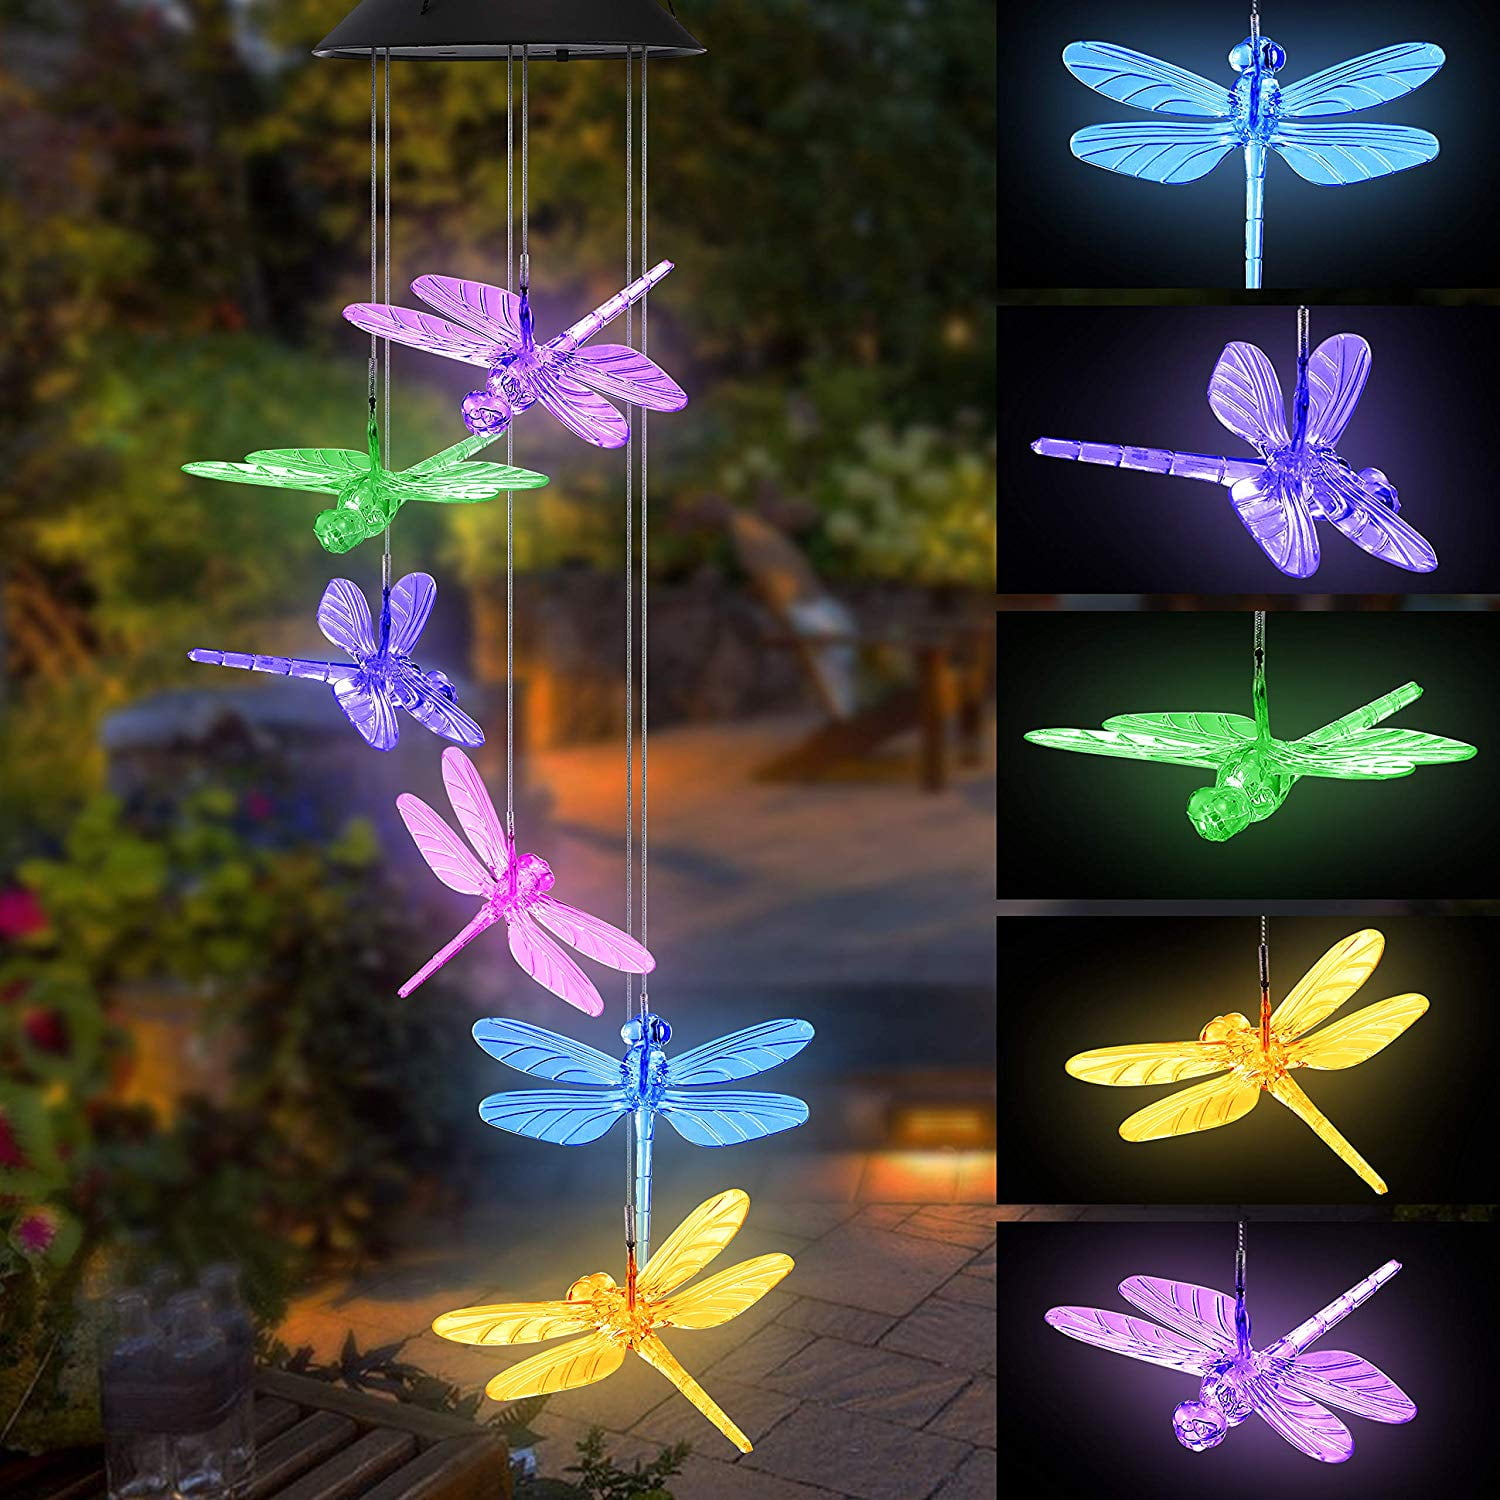 Solar Wind Chimes Butterfly Outdoor Wind Chimes Solar Lights Garden Outdoor Decorations for Patio Yard Pathway Decor 2 Different Colored Butterflies（Purple， Blue） 